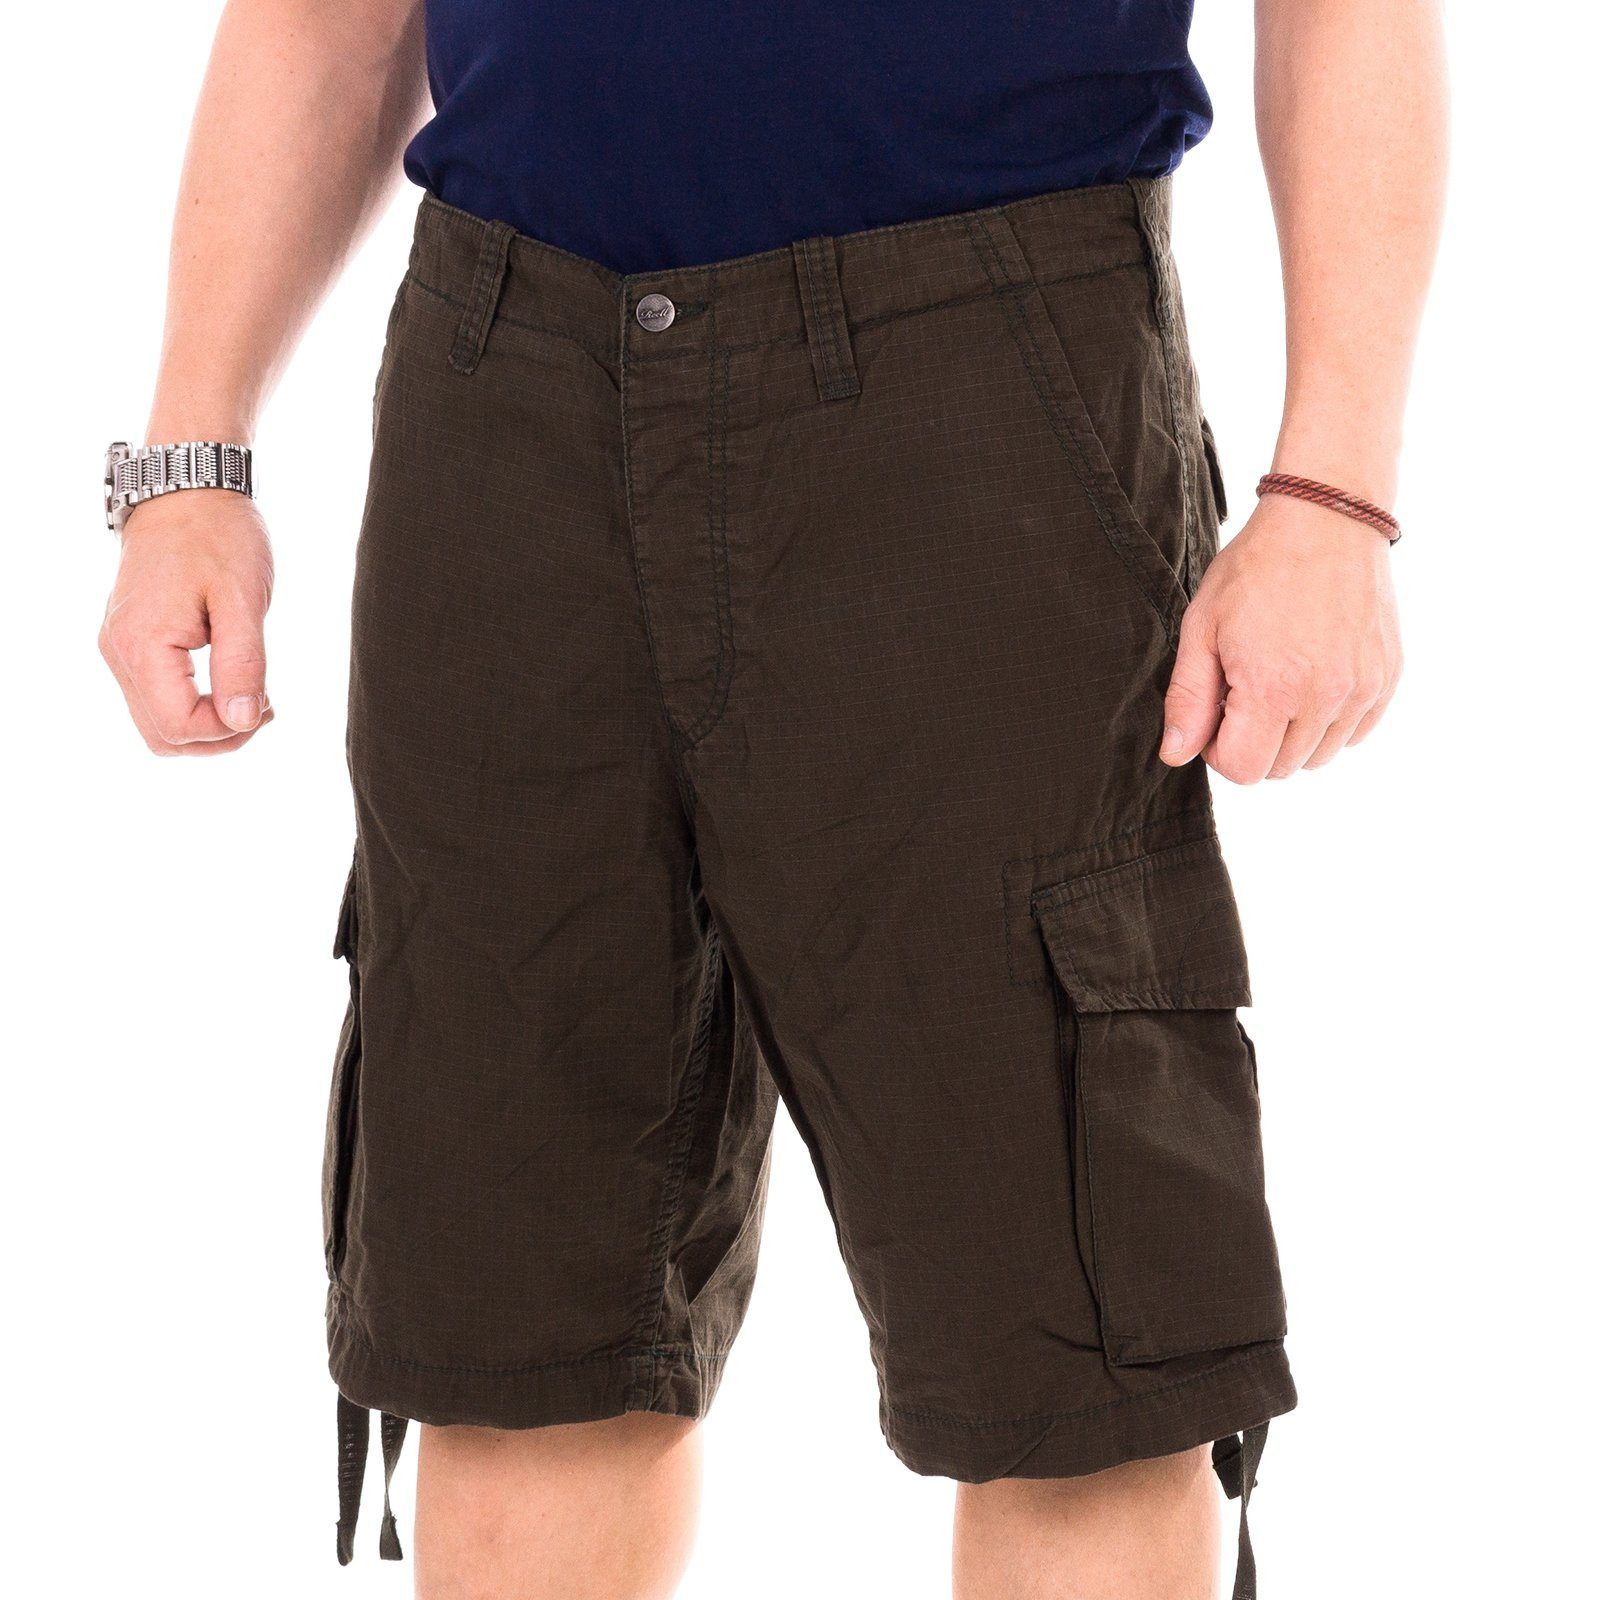 Reell Cargoshorts Short forest Cargo New REELL gre